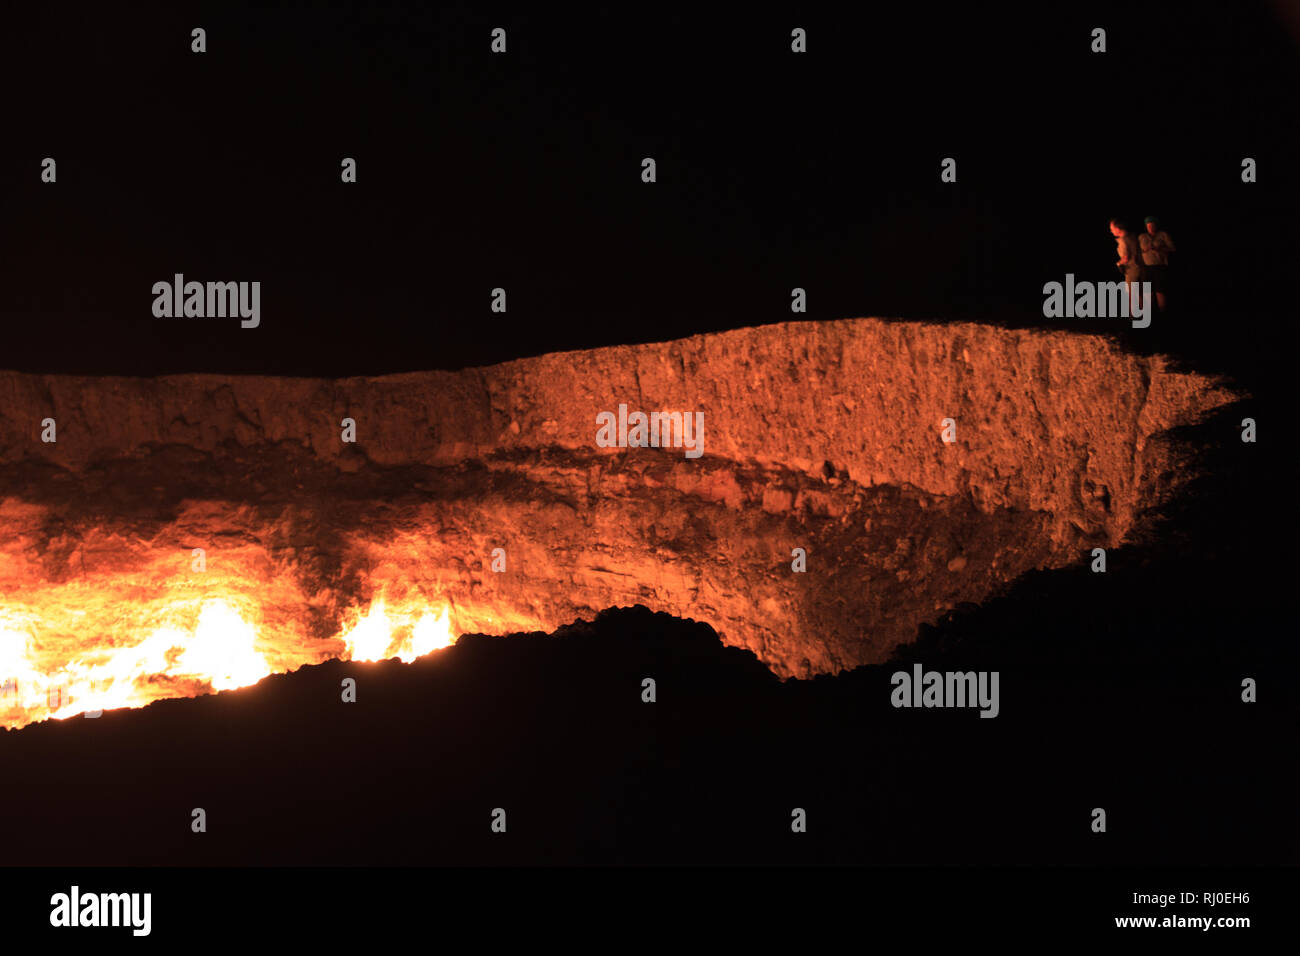 People looking down into The Darvasa Crater, also known as the Doorway to Hell, the flaming gas crater in Darvaza (Darvasa), Turkmenistan Stock Photo